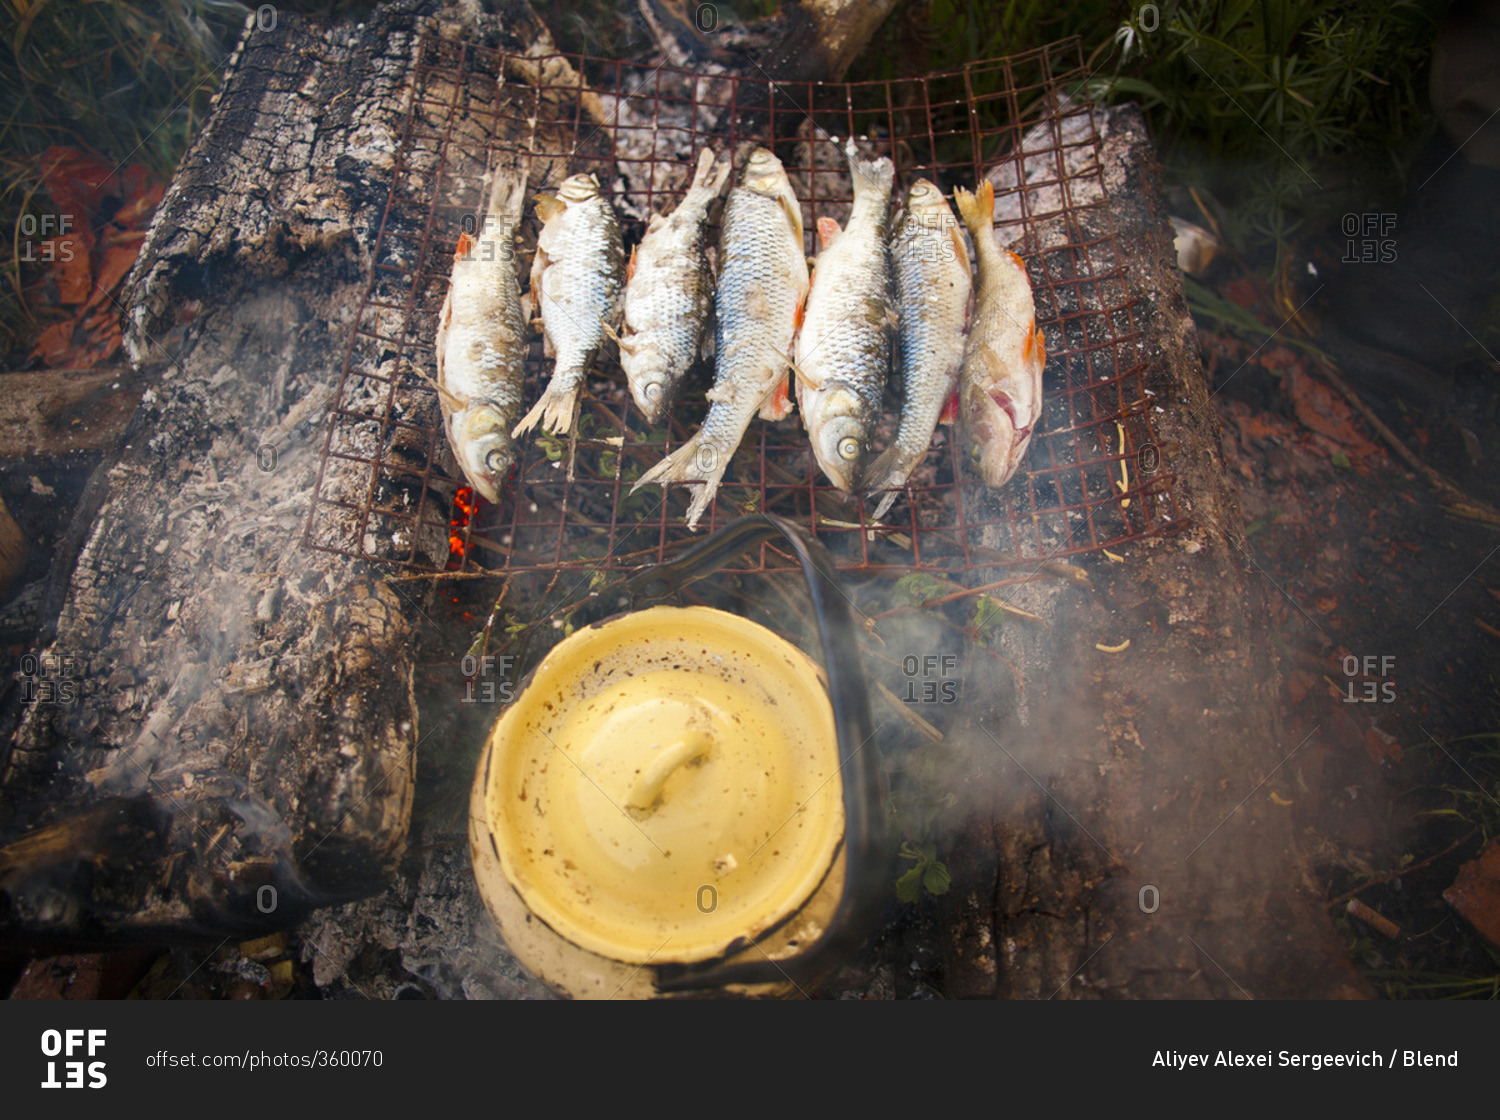 Fish grilling over campfire with dutch oven